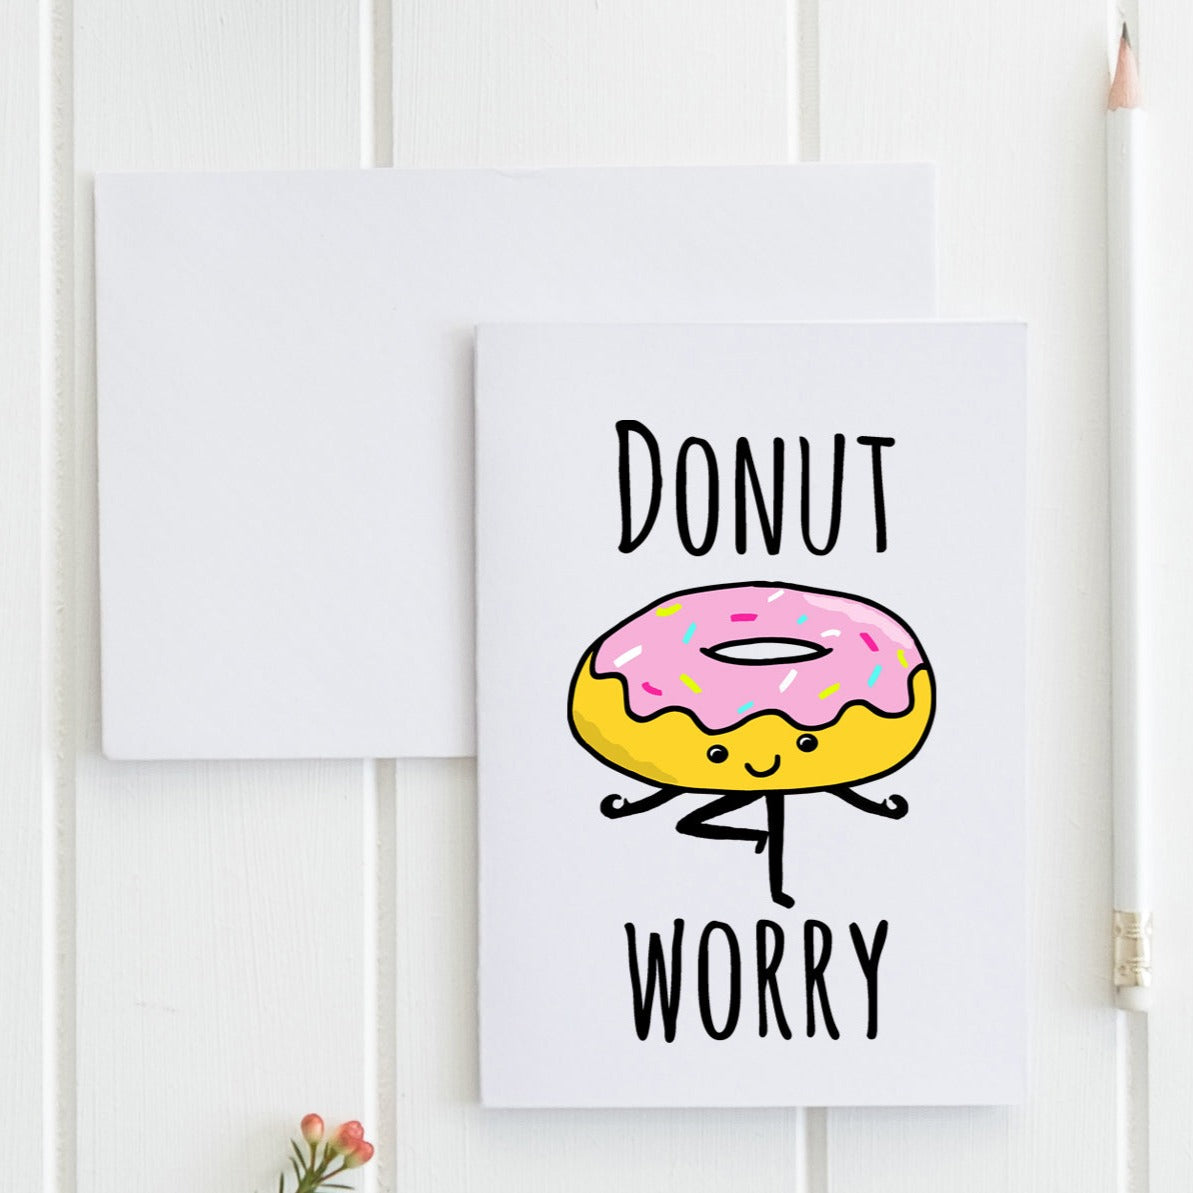 SALE - Donut Worry - Greeting Card